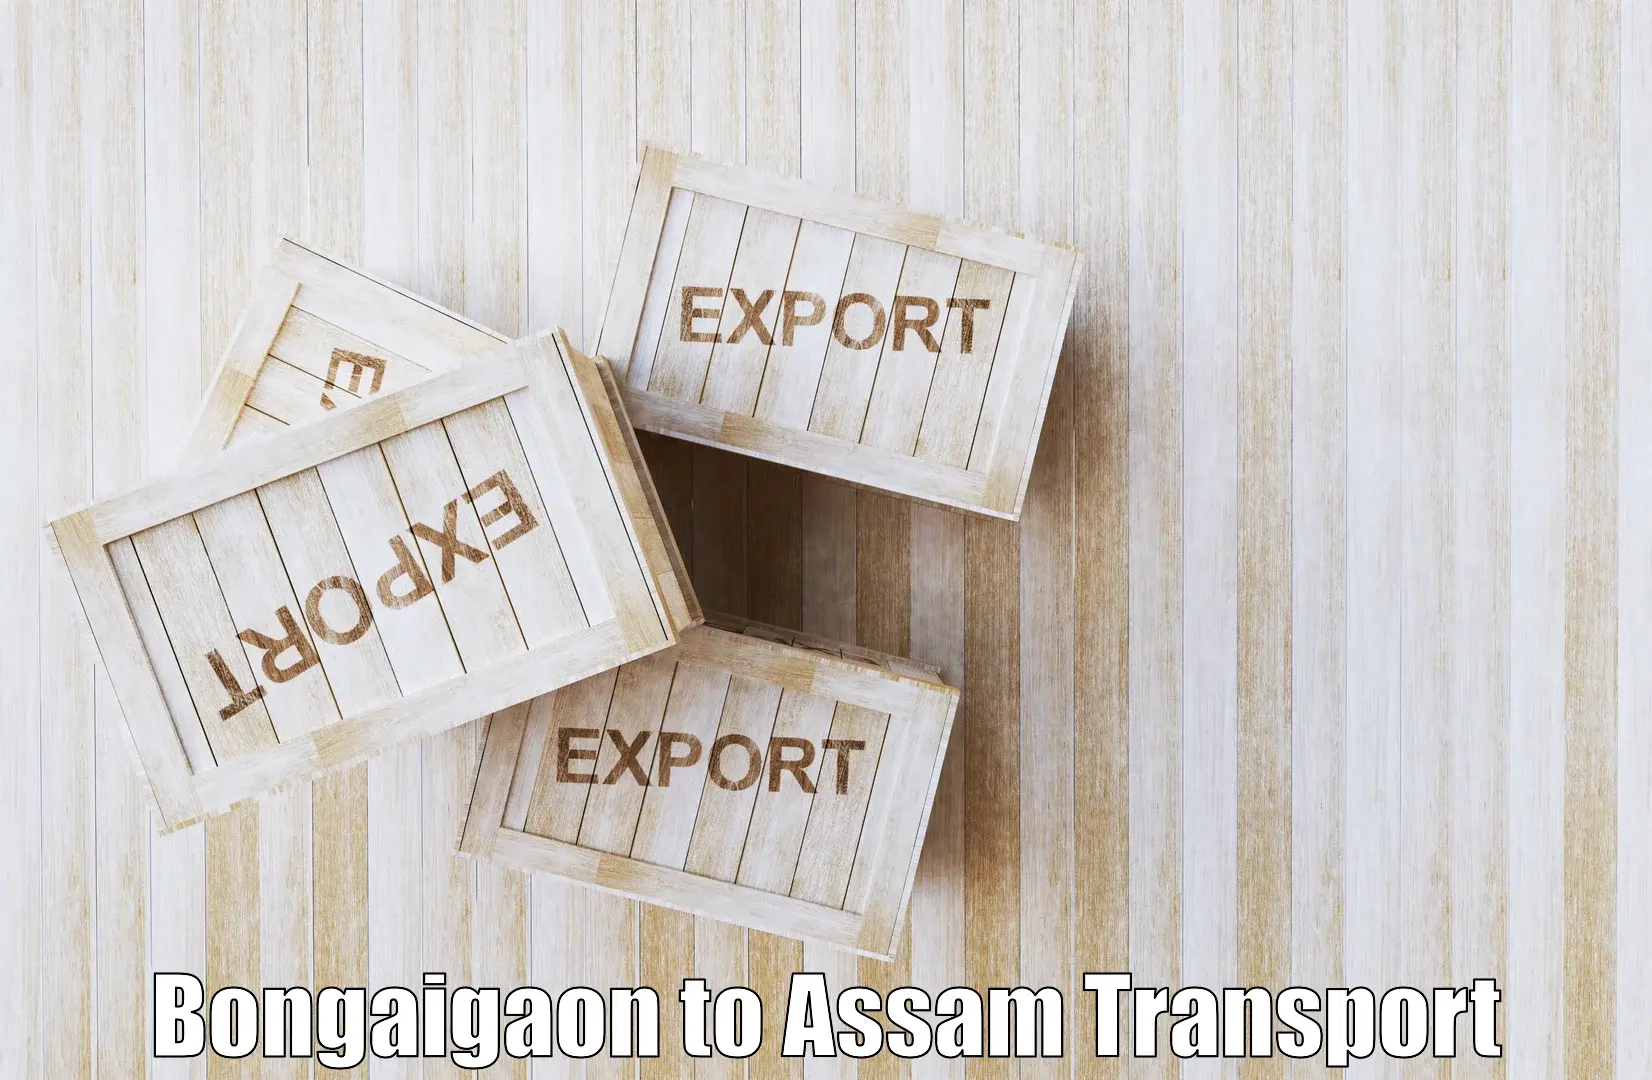 Best transport services in India Bongaigaon to Tinsukia